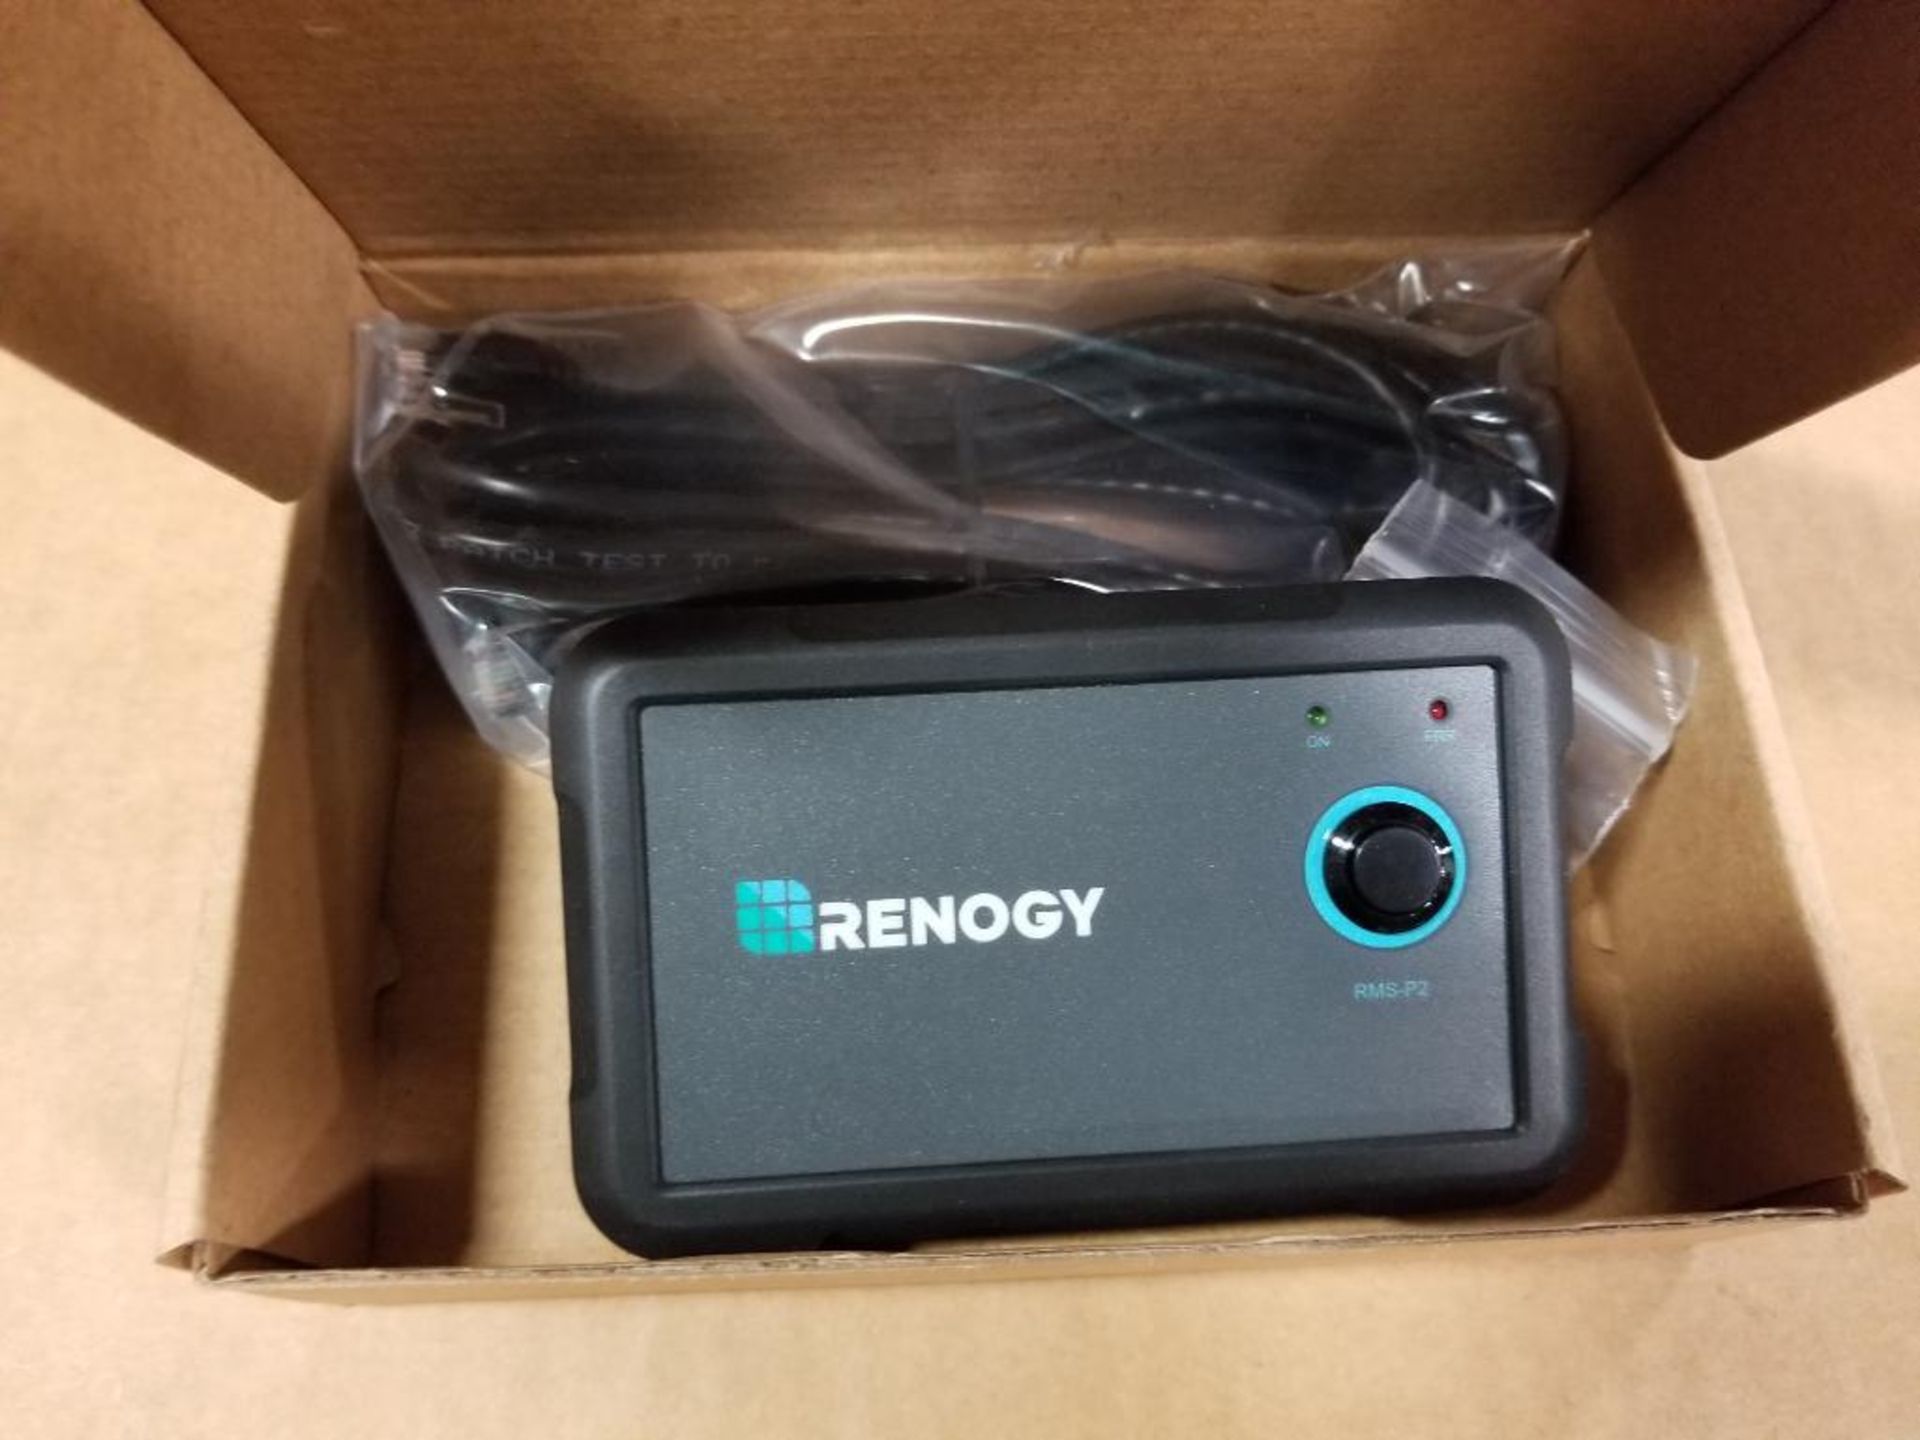 Qty 9 - Renogy RMS-P2 inverter charger. - Image 2 of 3